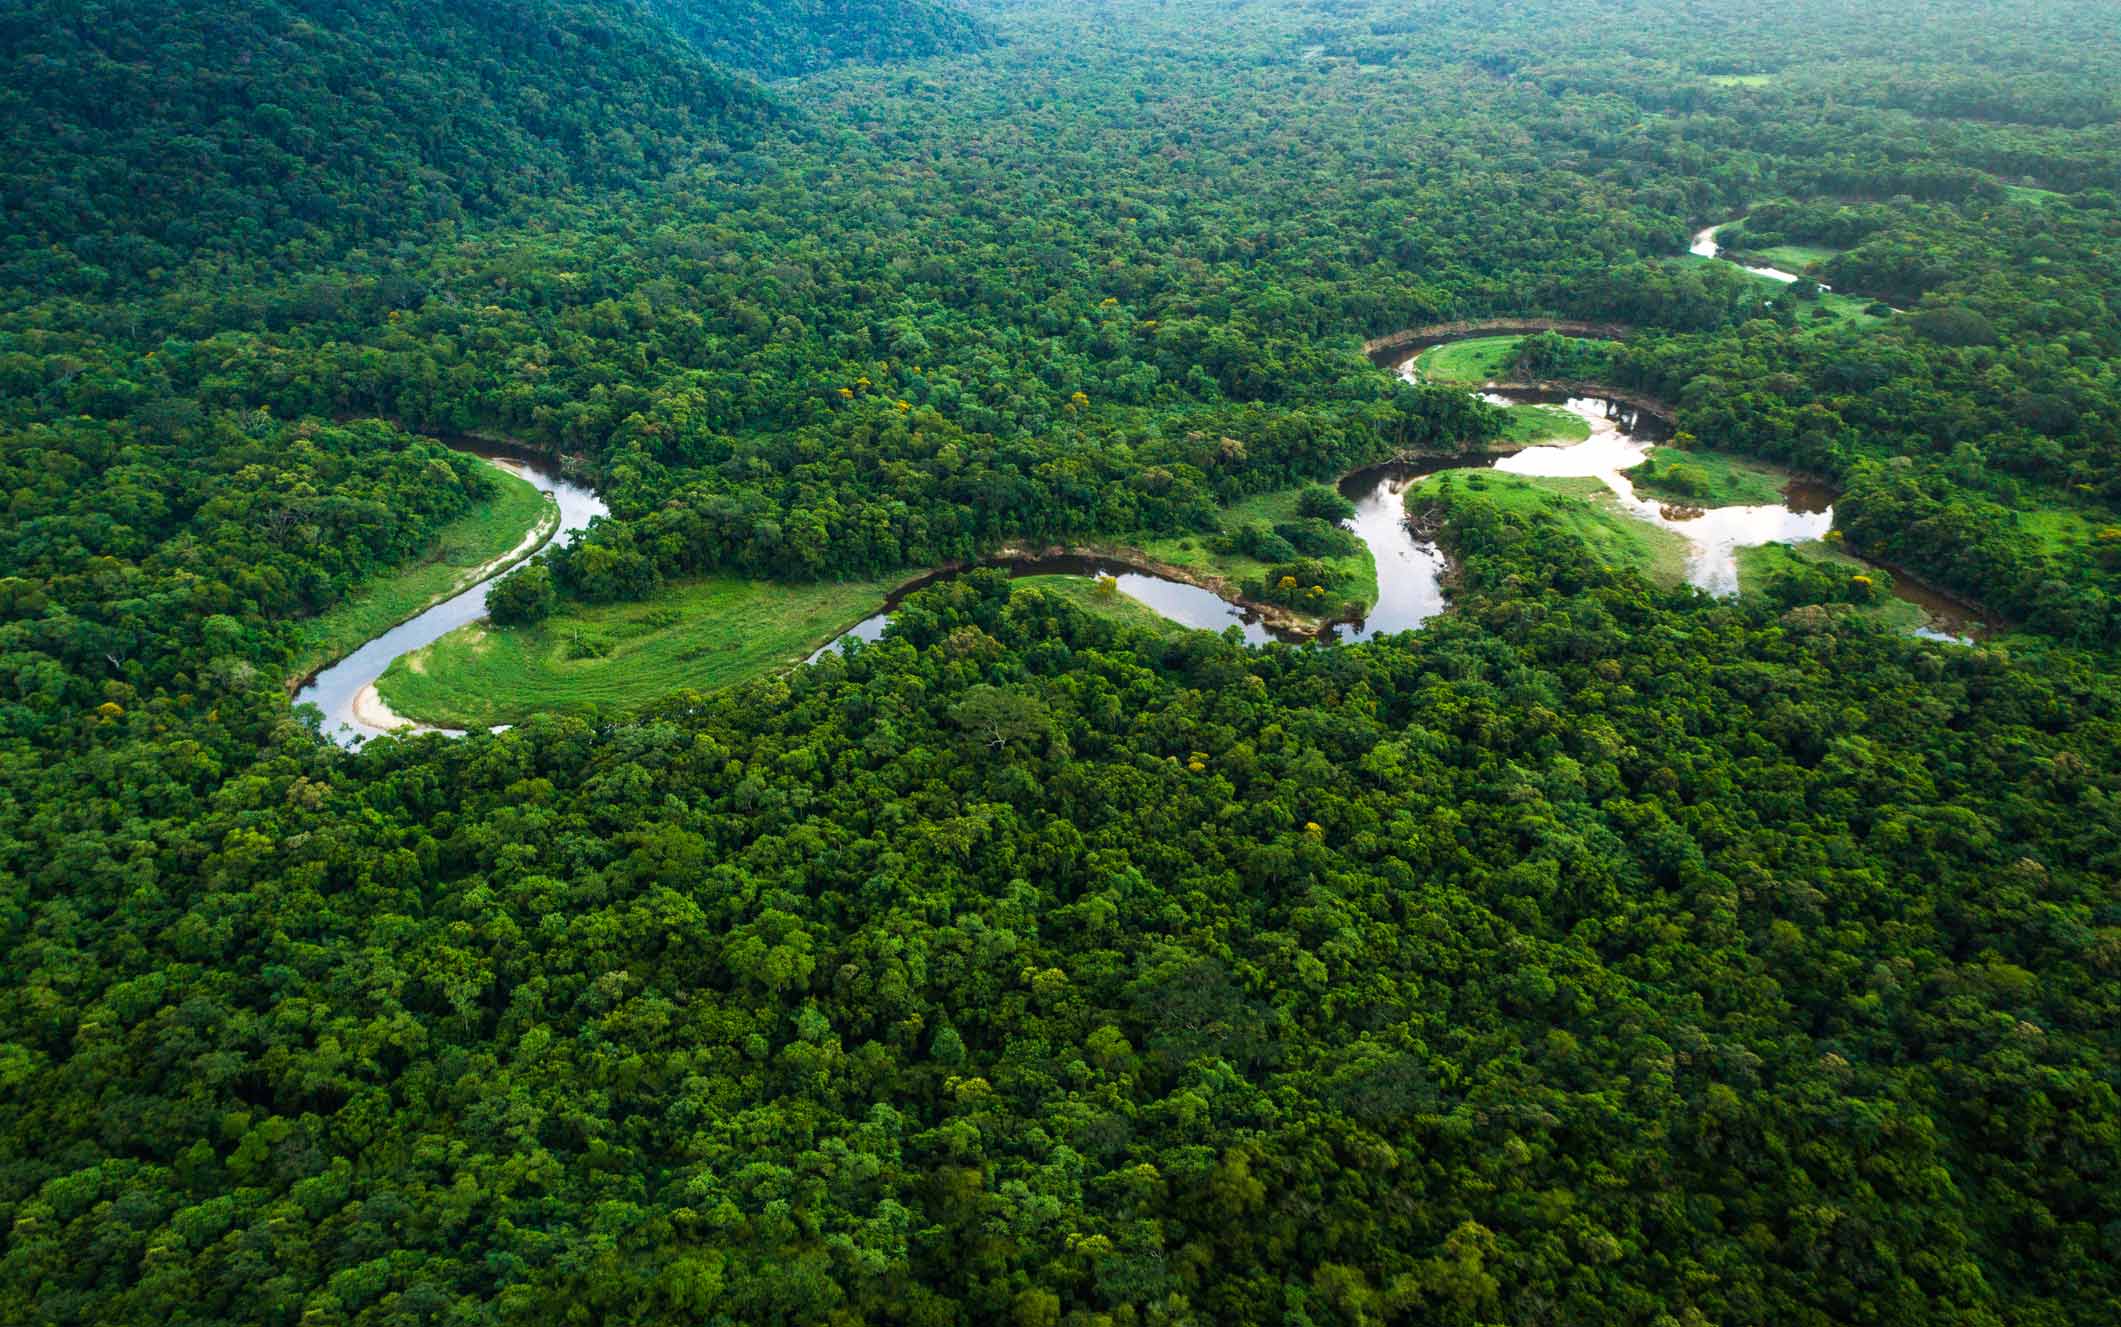 what is the world’s largest rainforest and where is it located?